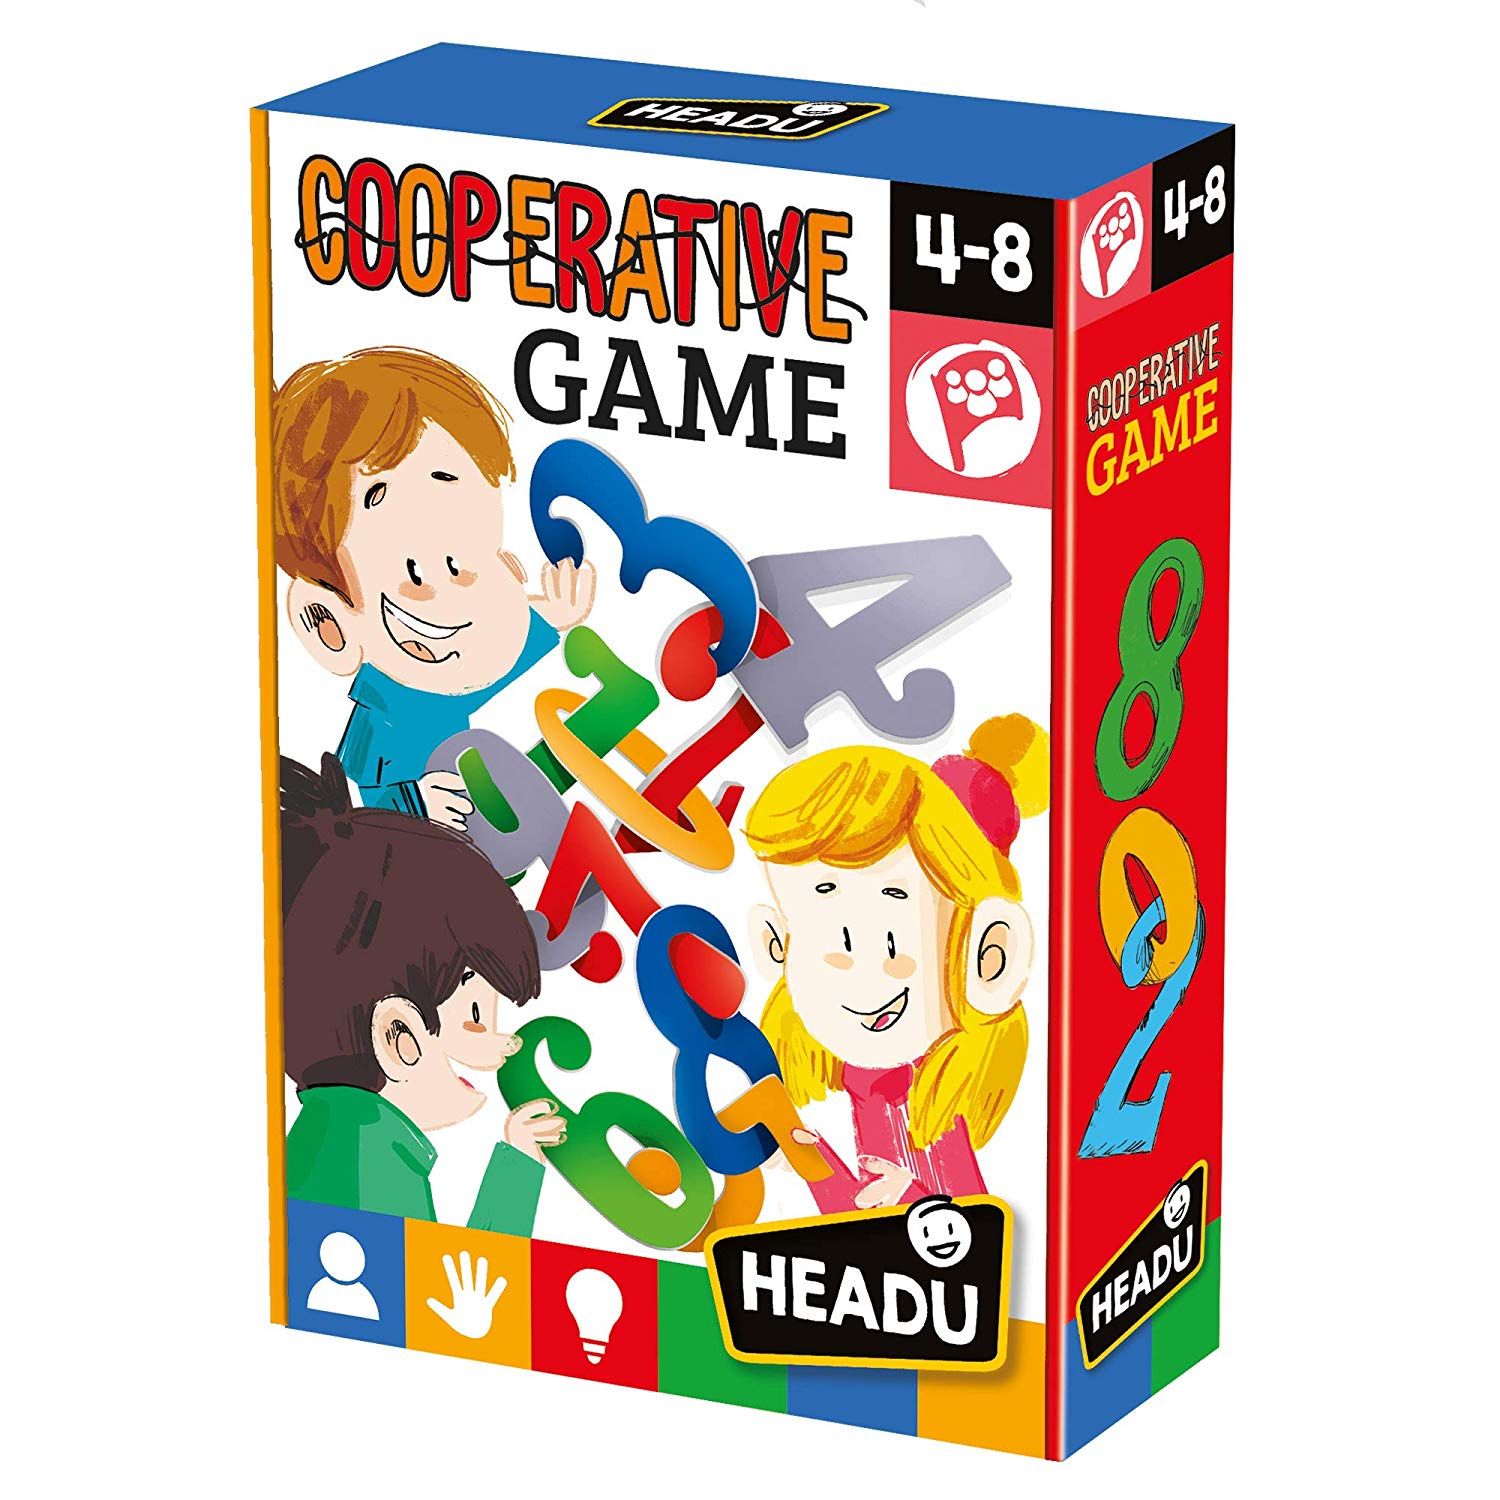 Cooperative game for children